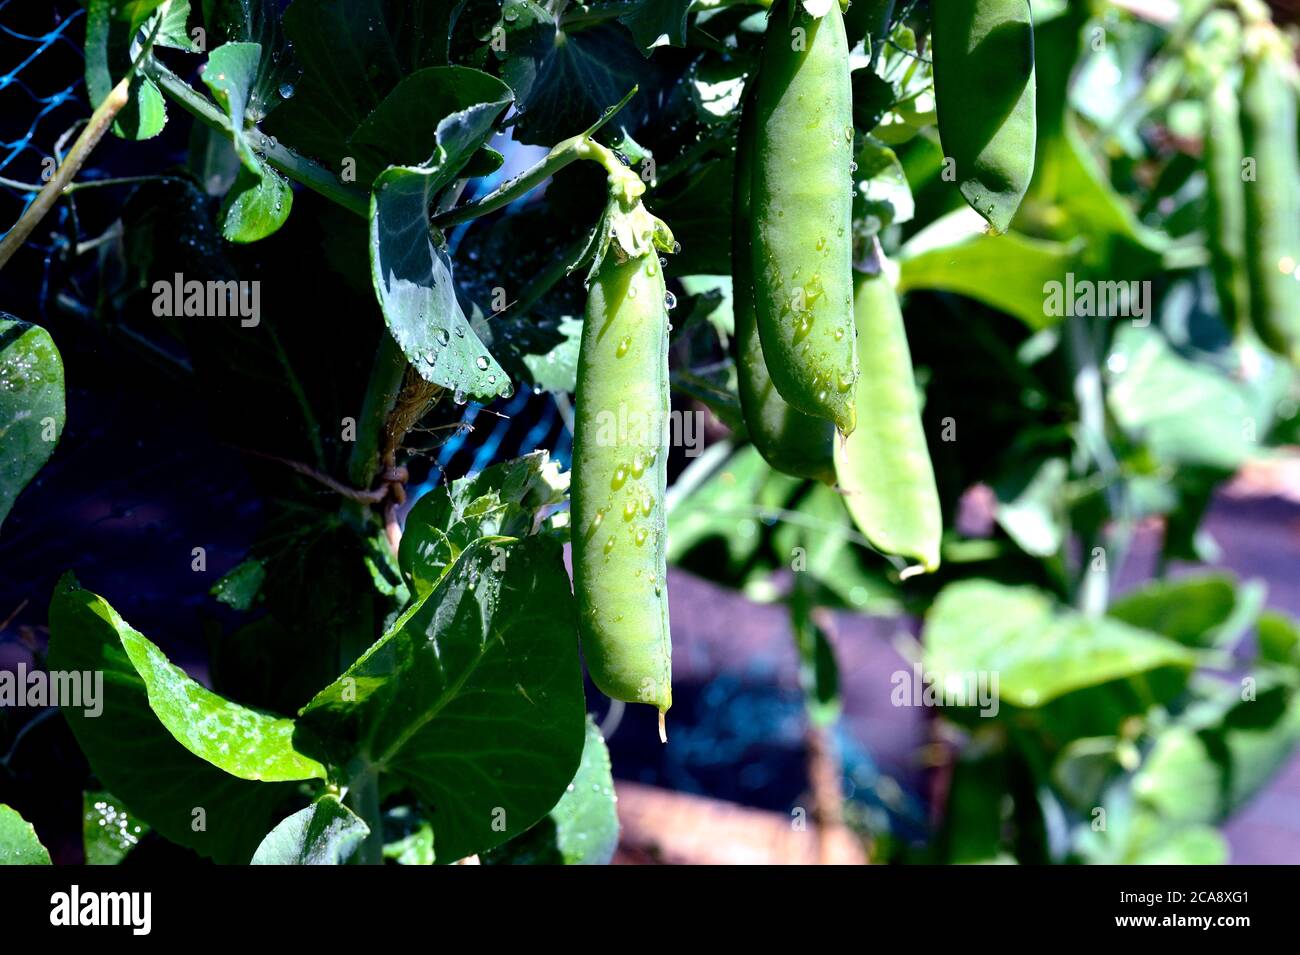 Fresh Peas hanging in pods Stock Photo